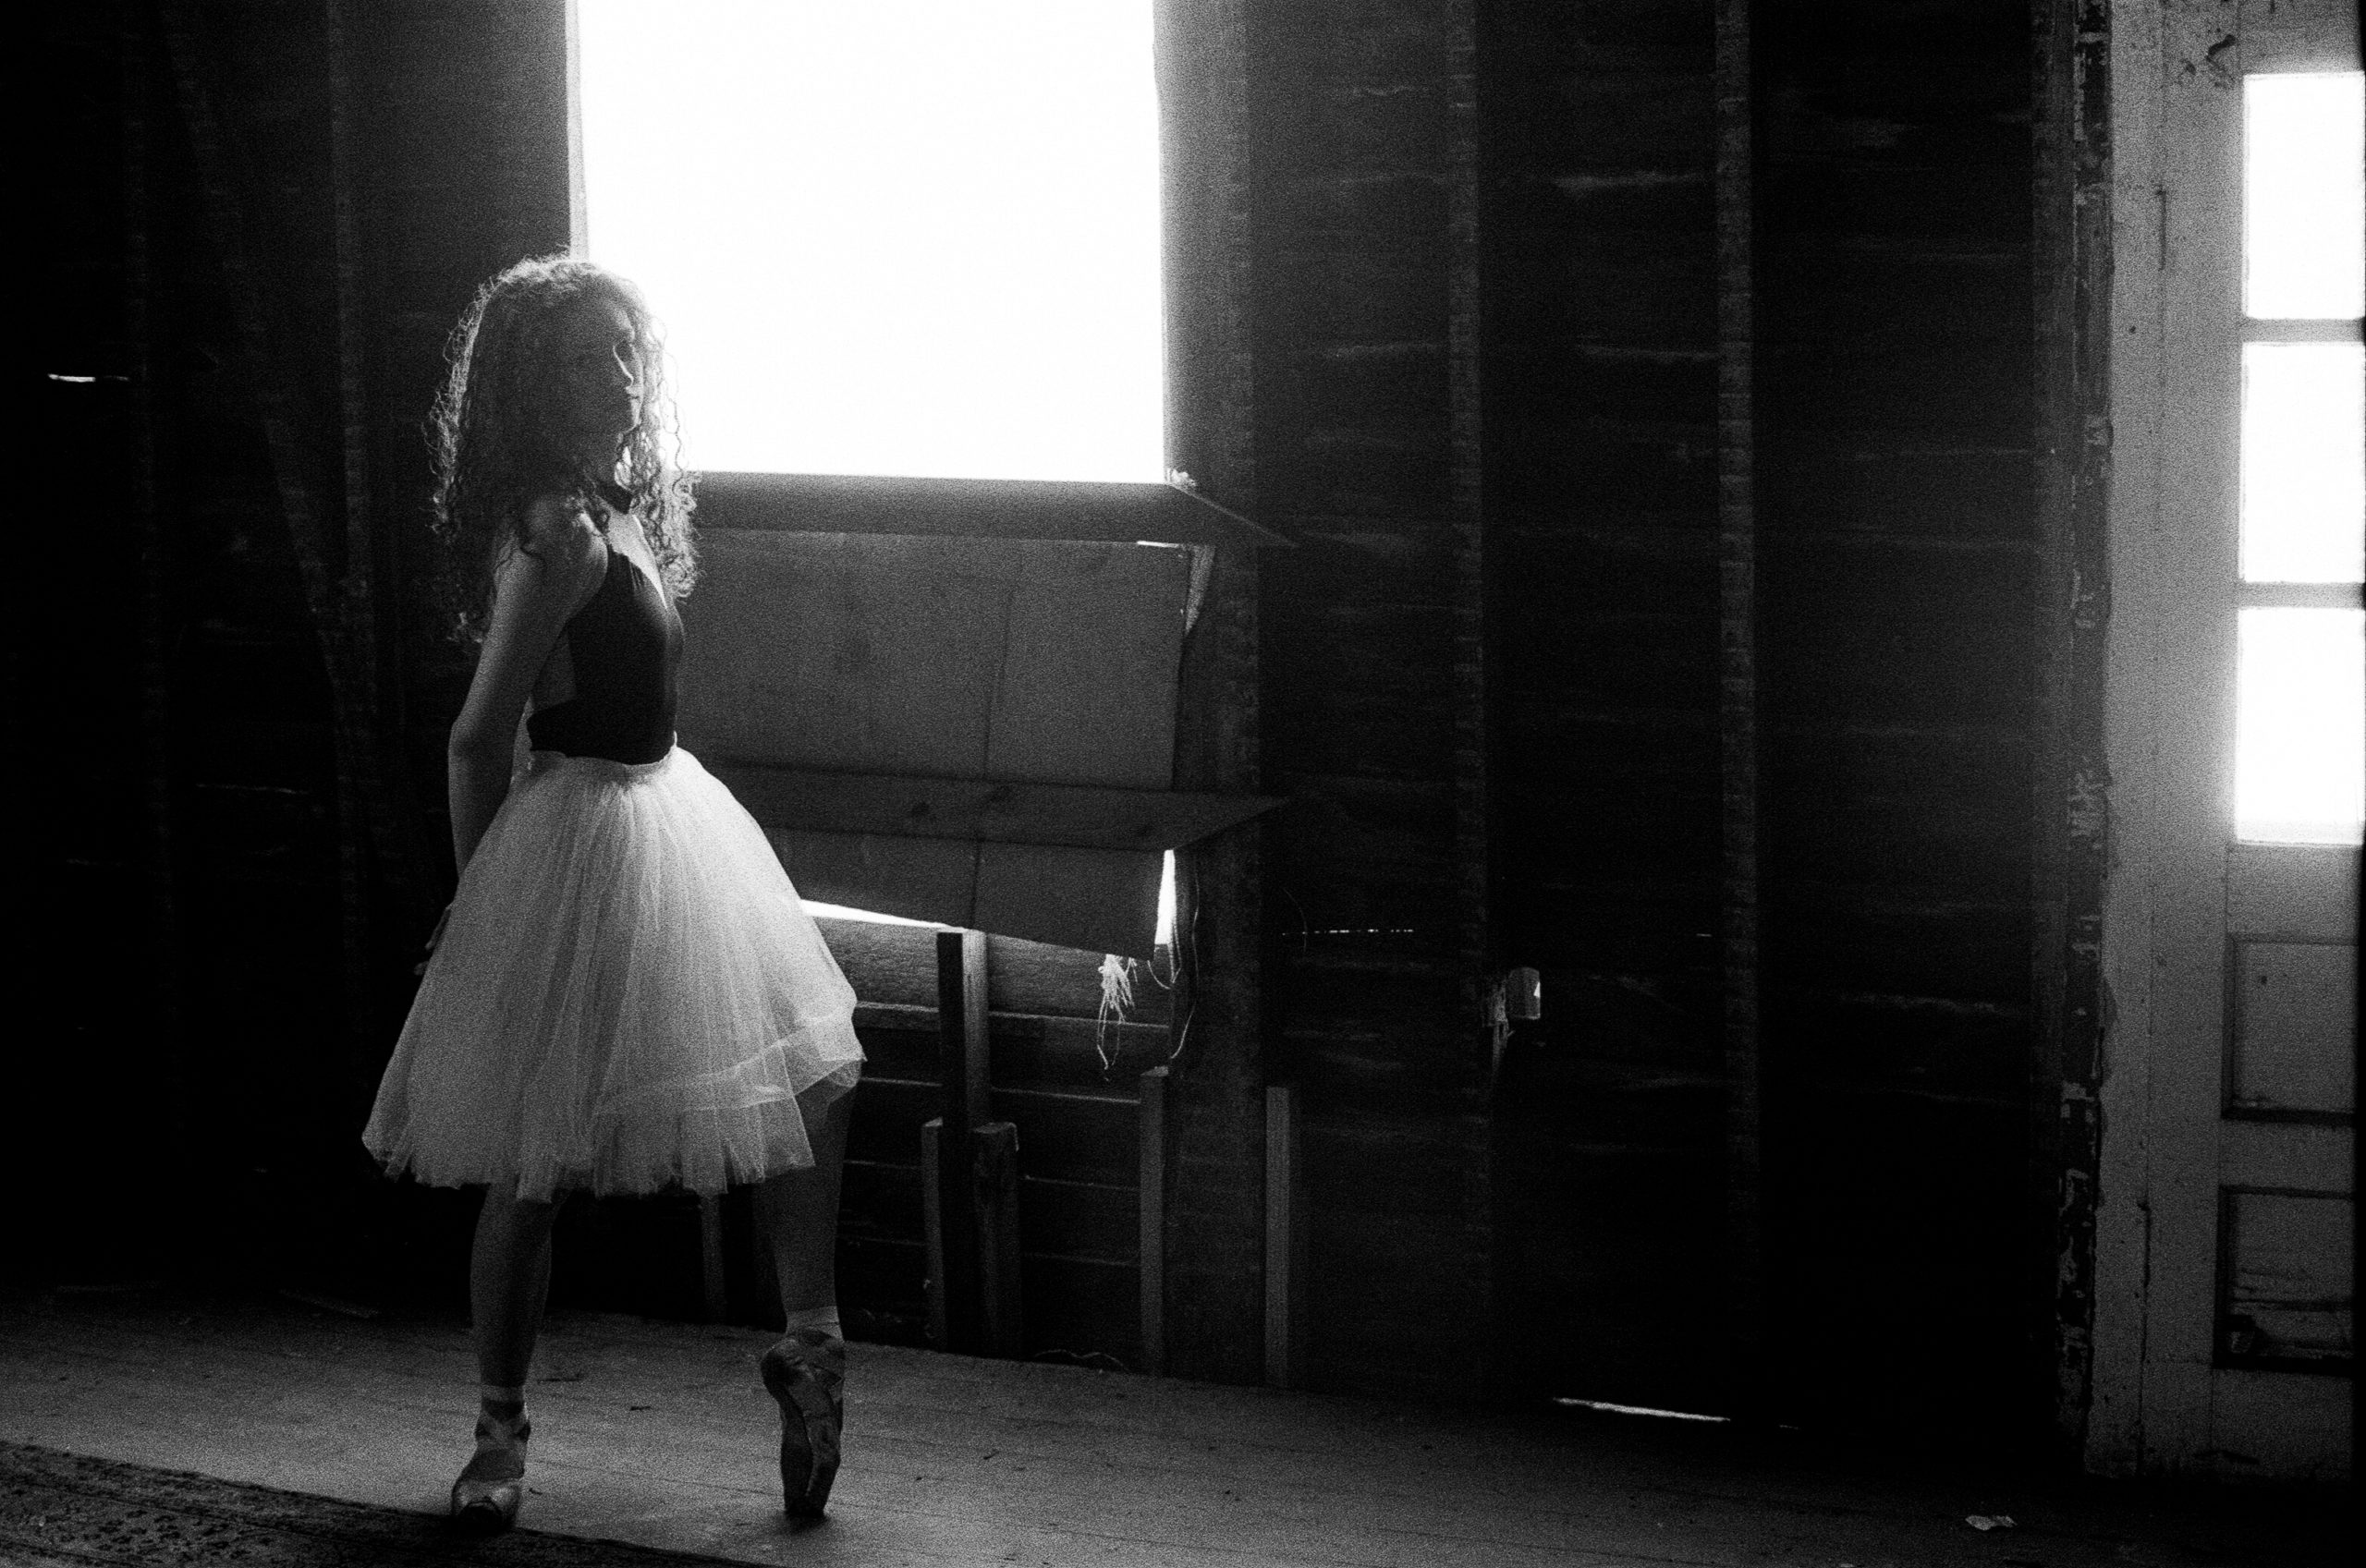 In this black and white photo, Anna Jensen wears a dark leotard, knee-length white tutu and pointe shoes and poses in what looks like the inside of a gutted house. She stands in profile with her left foot propped on pointe and her hands clasped behind her, looking wistfully towards the camera.